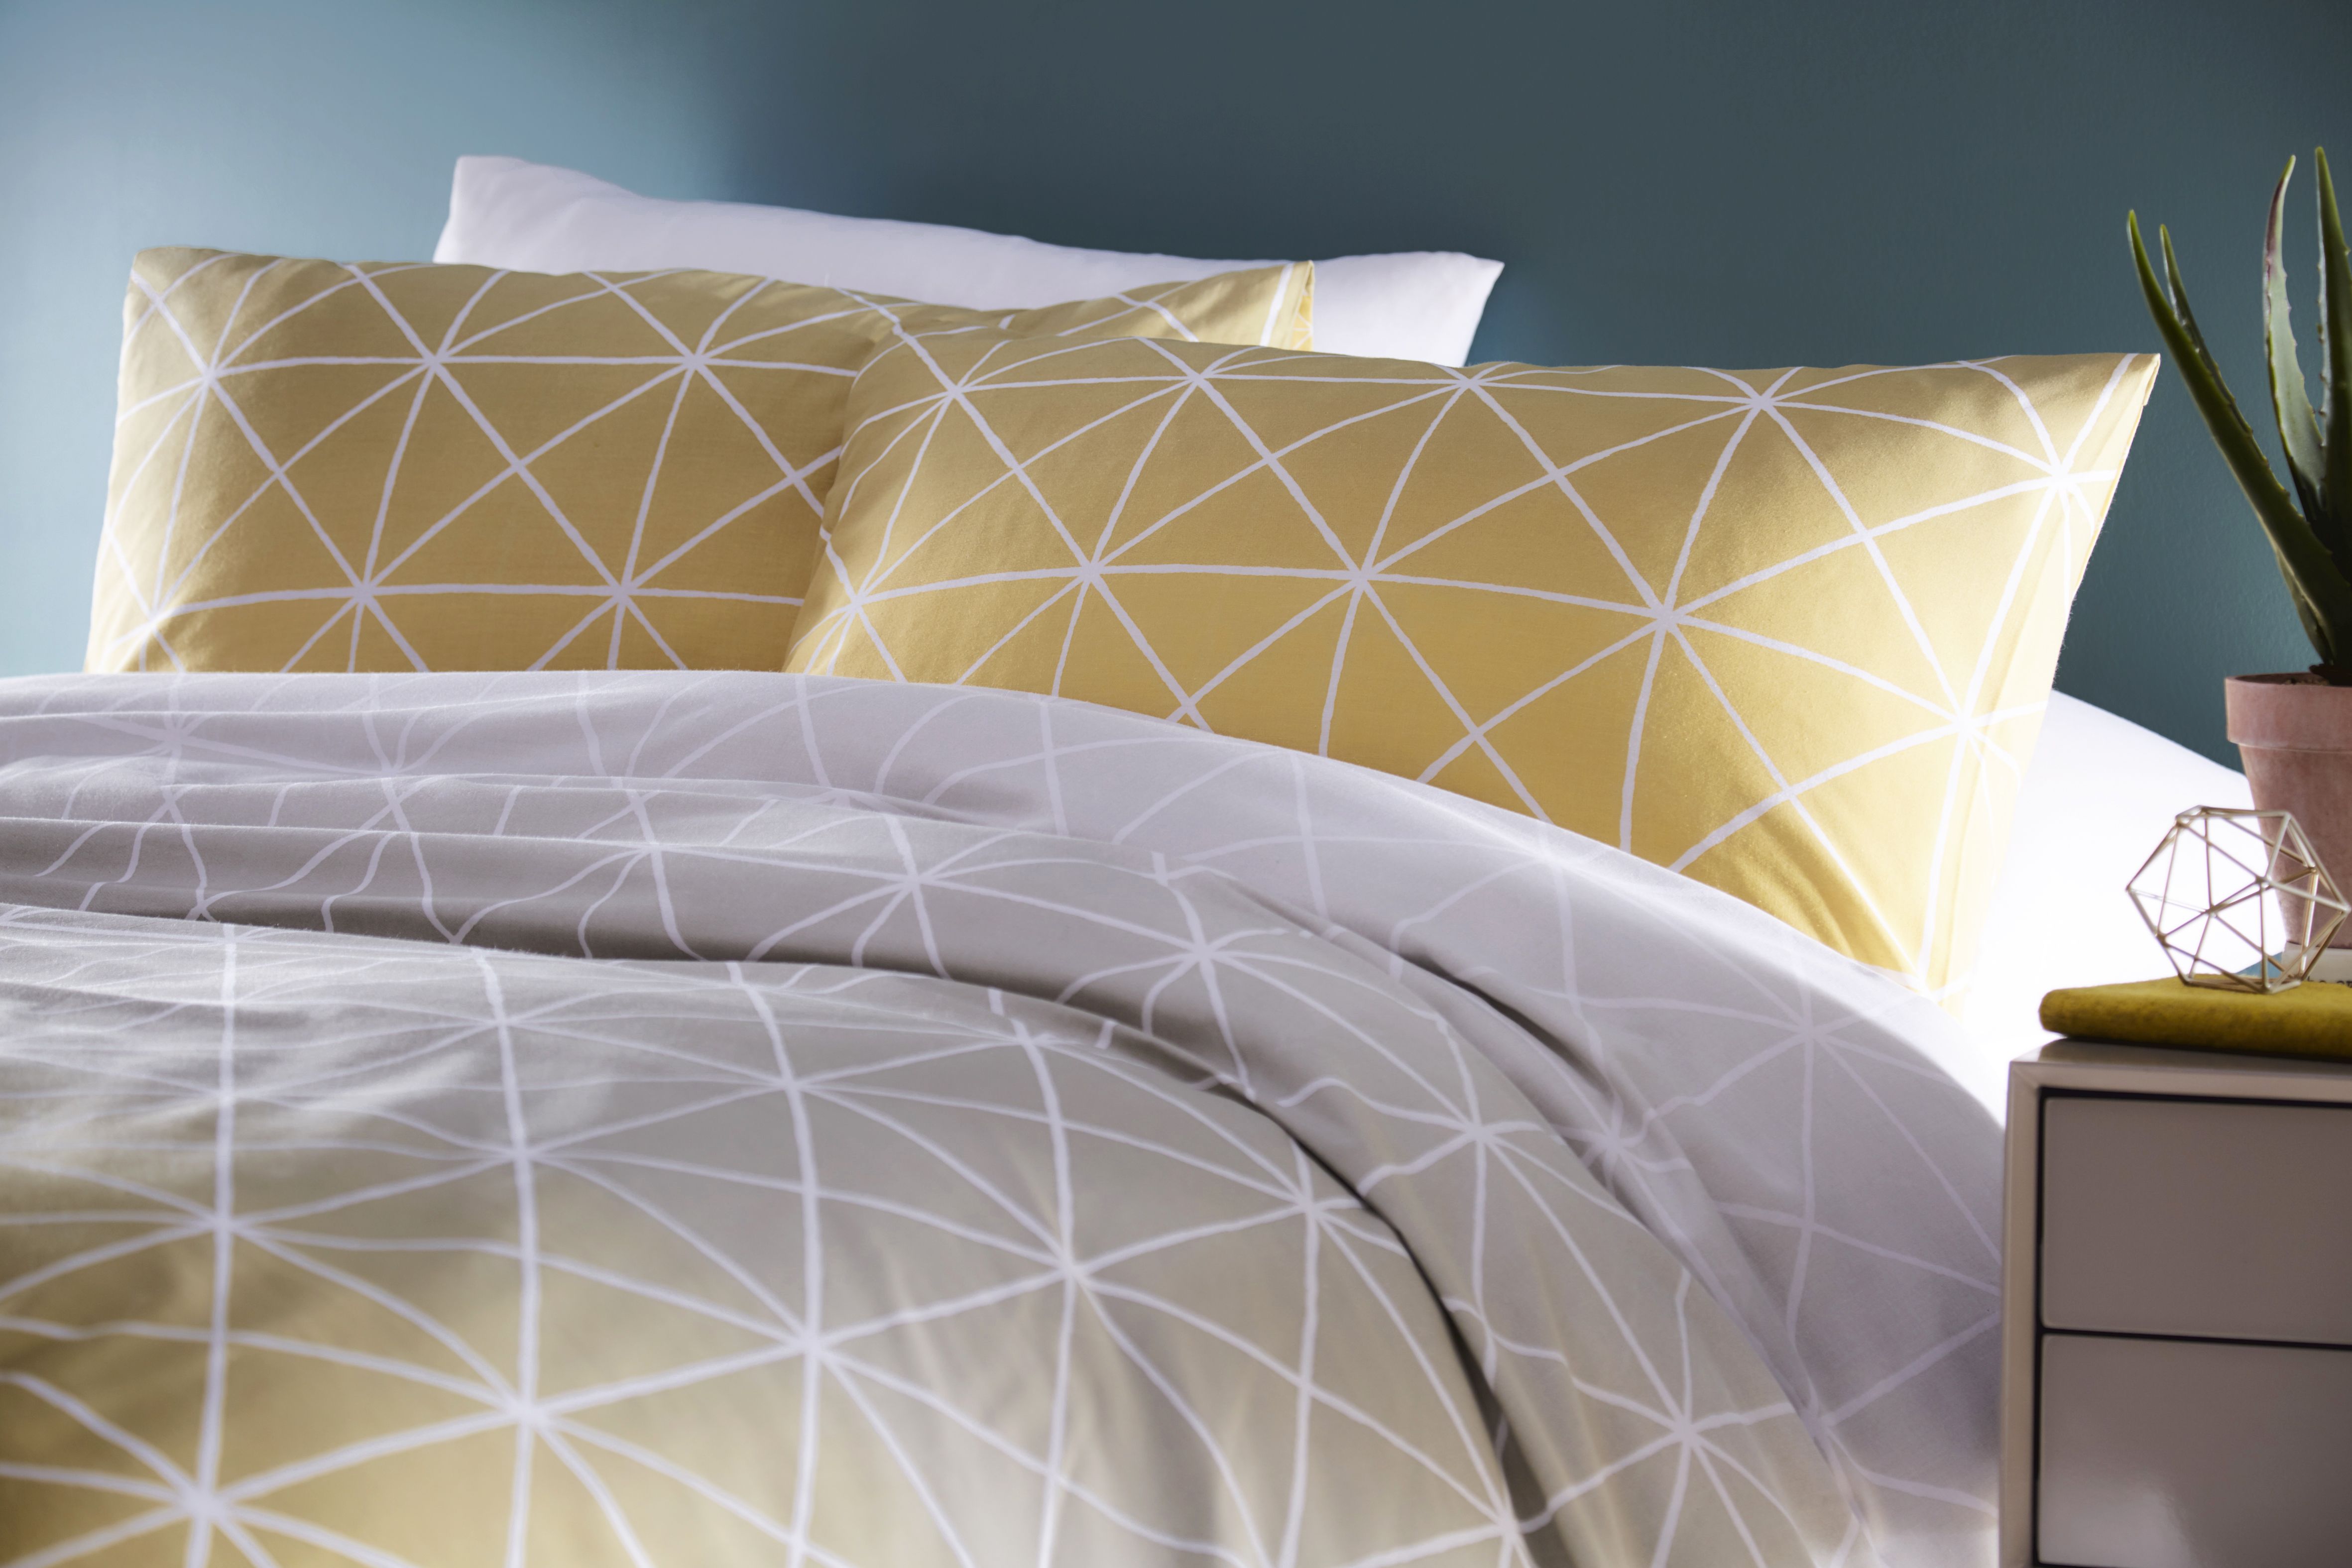 Featuring a gorgeous gradient flowing from a crisp white, to Dove Grey and finishing on a beautiful Ochre the Spectrum duvet cover set is a versatile piece. Complete with thin white lines in a geometric pattern it brings a modern touch that will elevate your bedroom into a contemporary space. The reverse has a matching plain Ochre with white dots to neutralise the statement front. Each duvet set comes with matching pillowcases with a reversible design. Made of crisp polycotton making this duvet set soft and hard-wearing. This duvet cover features a secure button closure while the pillowcases have an envelope closure. Machine washable on a 40 degree cycle. Iron cool and tumble dry on a low setting for the best finish.